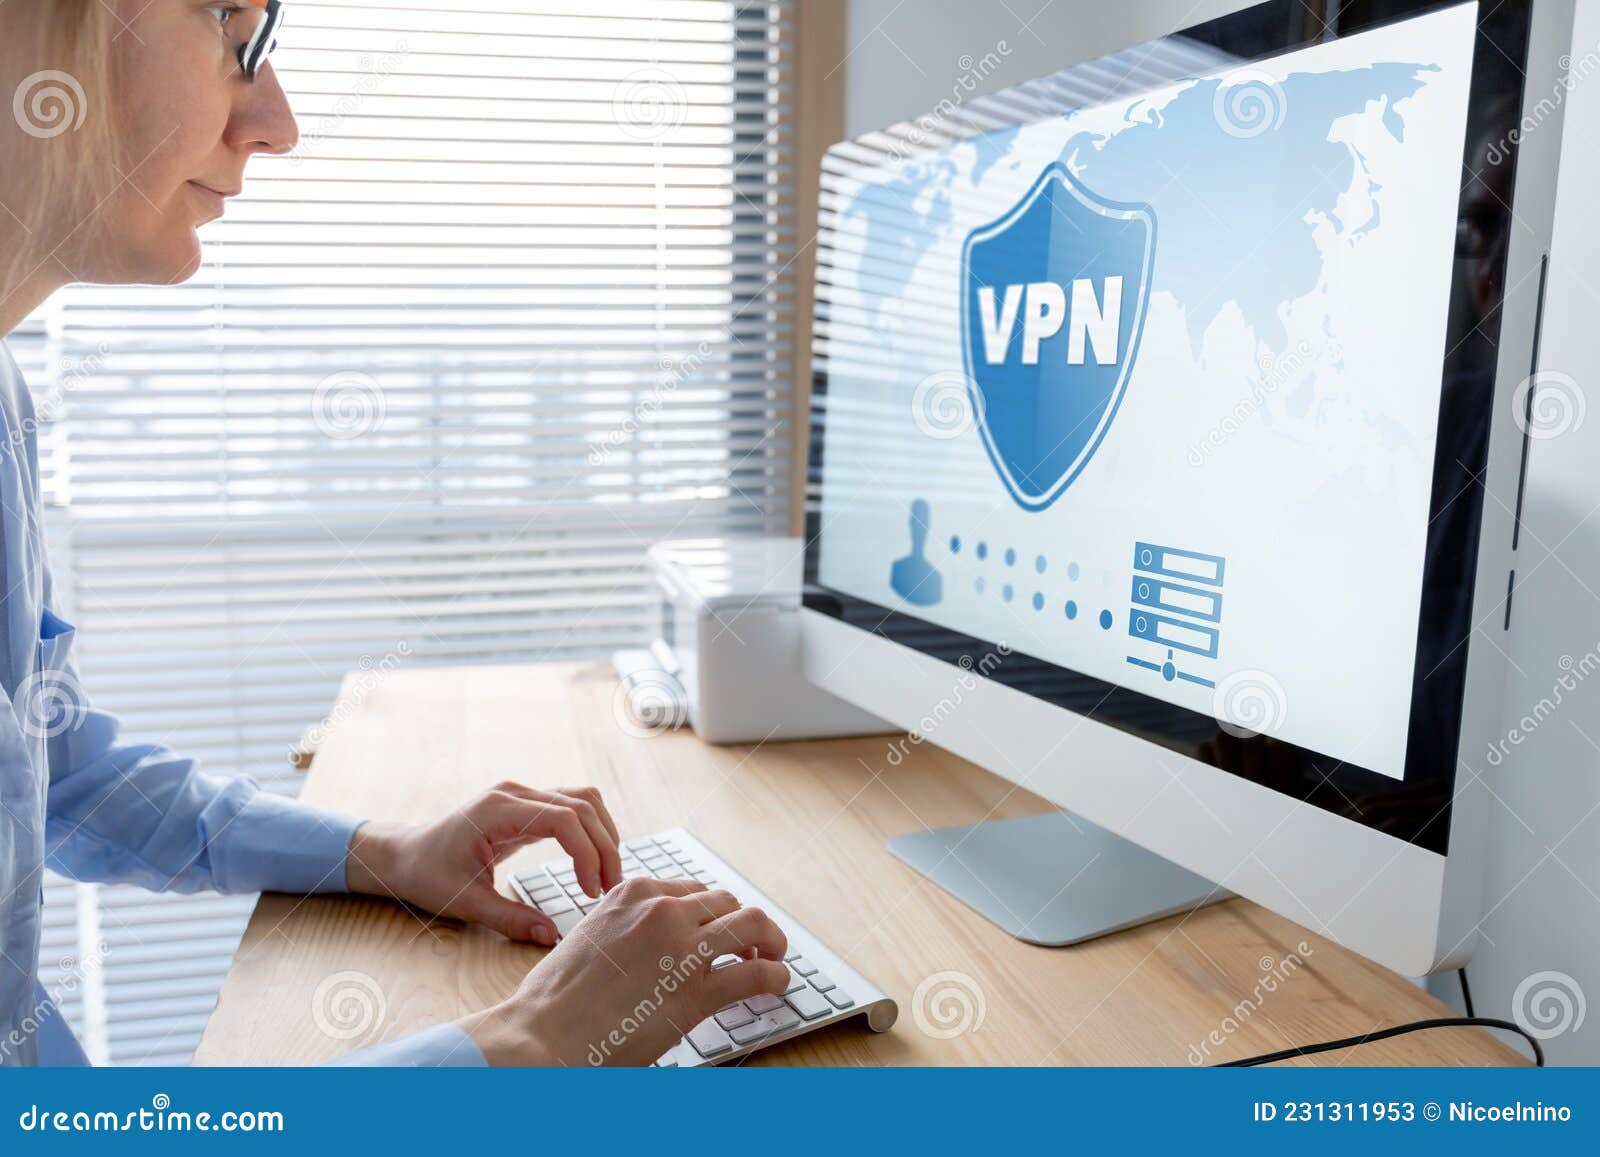 vpn secure connection for telecommuter. person using virtual private network technology on computer to create encrypted tunnel to